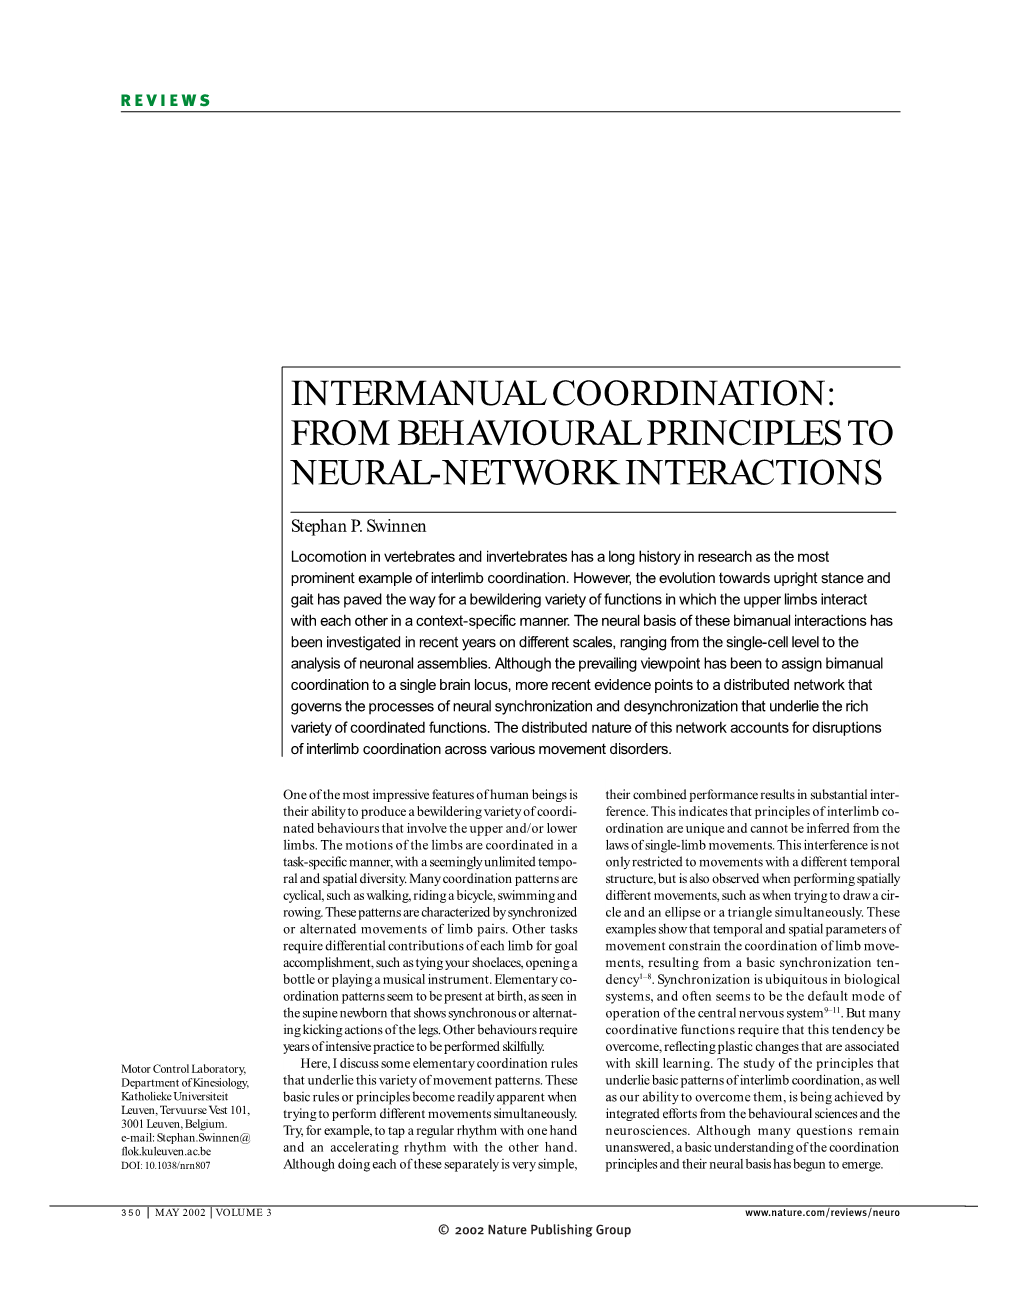 Intermanual Coordination: from Behavioural Principles to Neural-Network Interactions